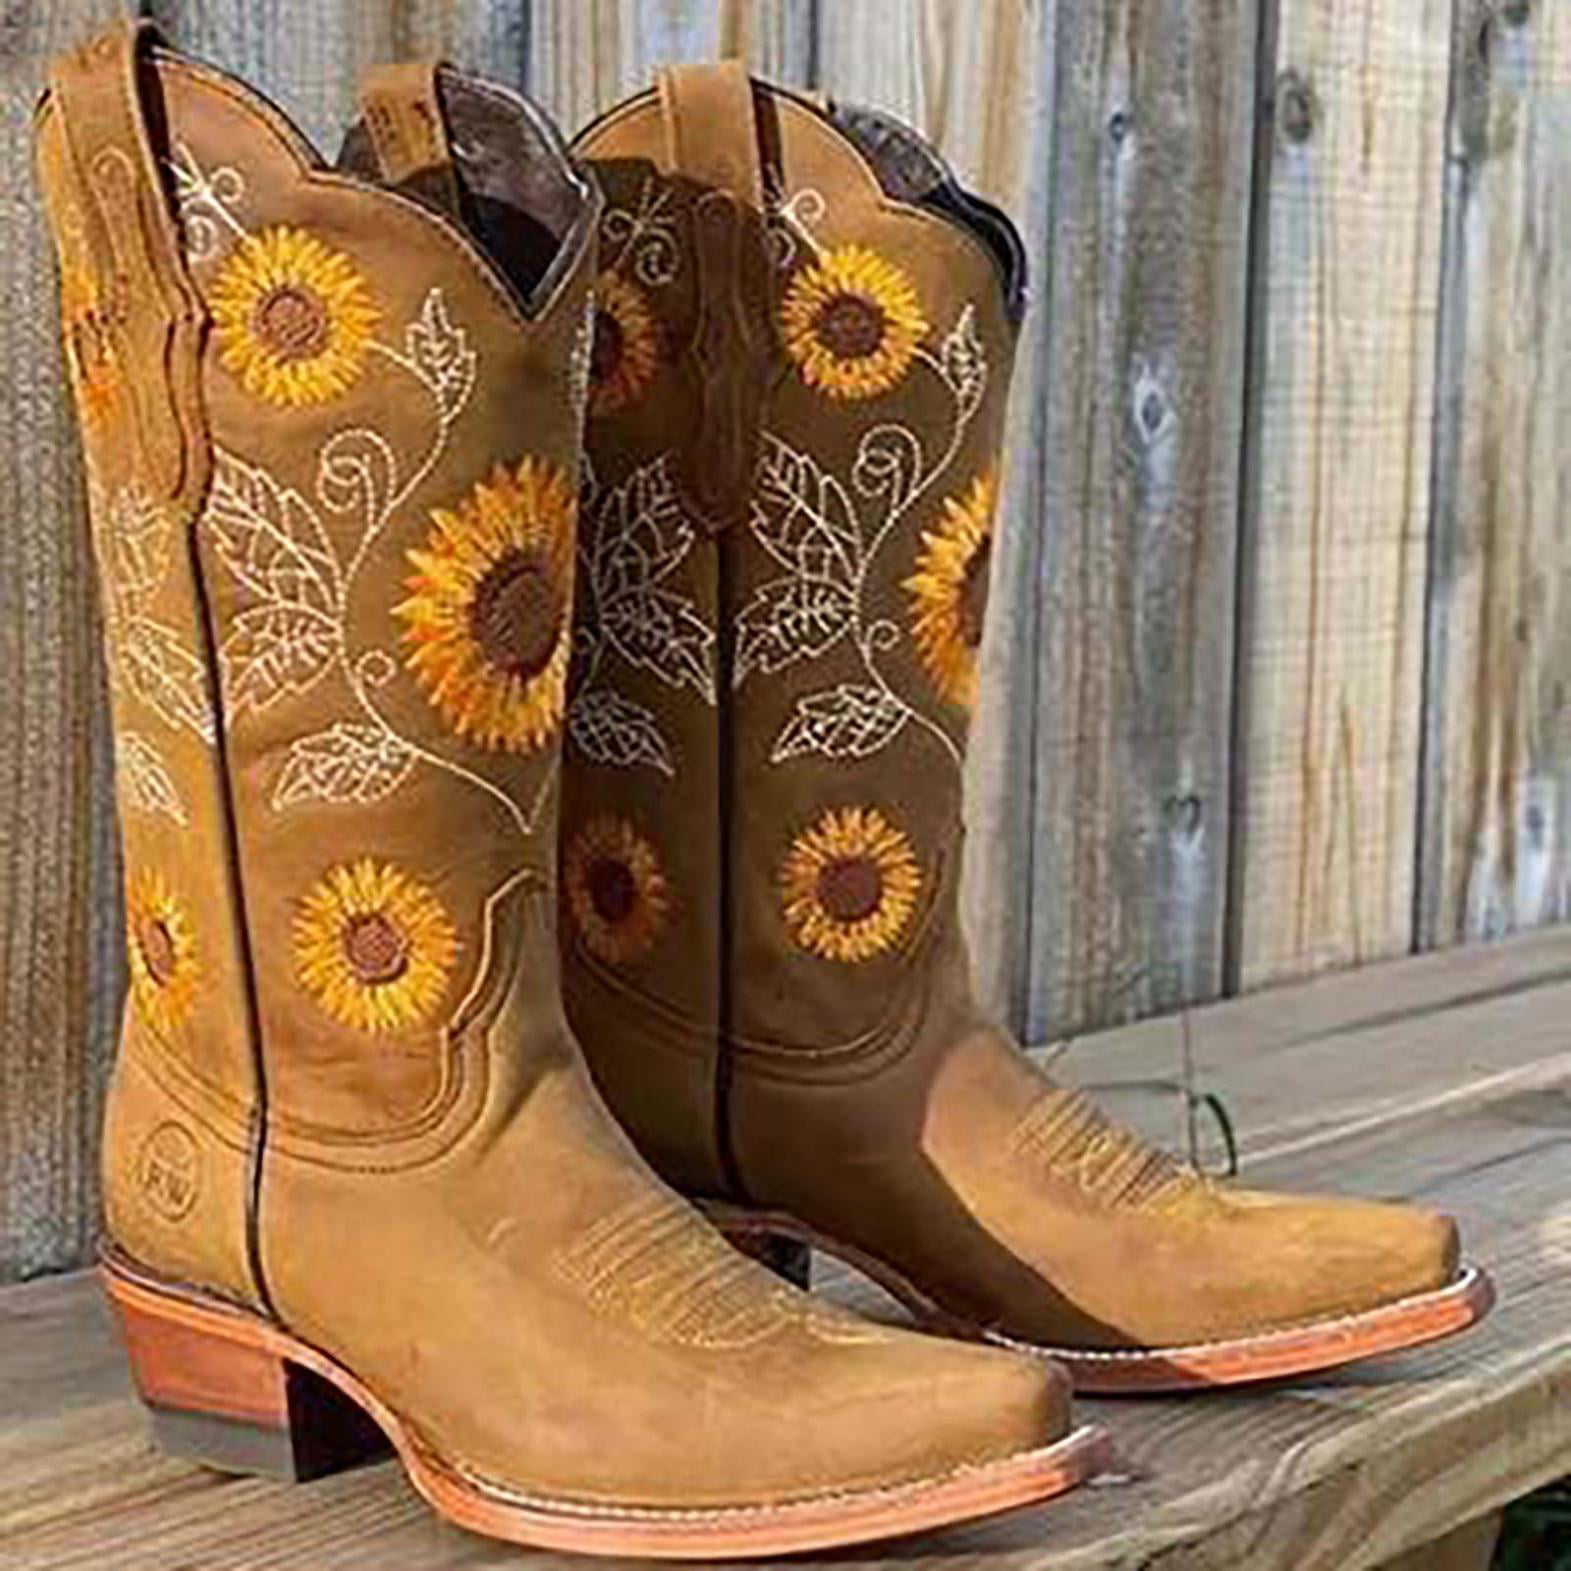 Womens Boots Western Boots Fashion Sunflowers Embroidered Round Toe Mid Calf Chunky Heel Cowboy Boots Comfortable Square Heel Slip-on Casual Shoes 